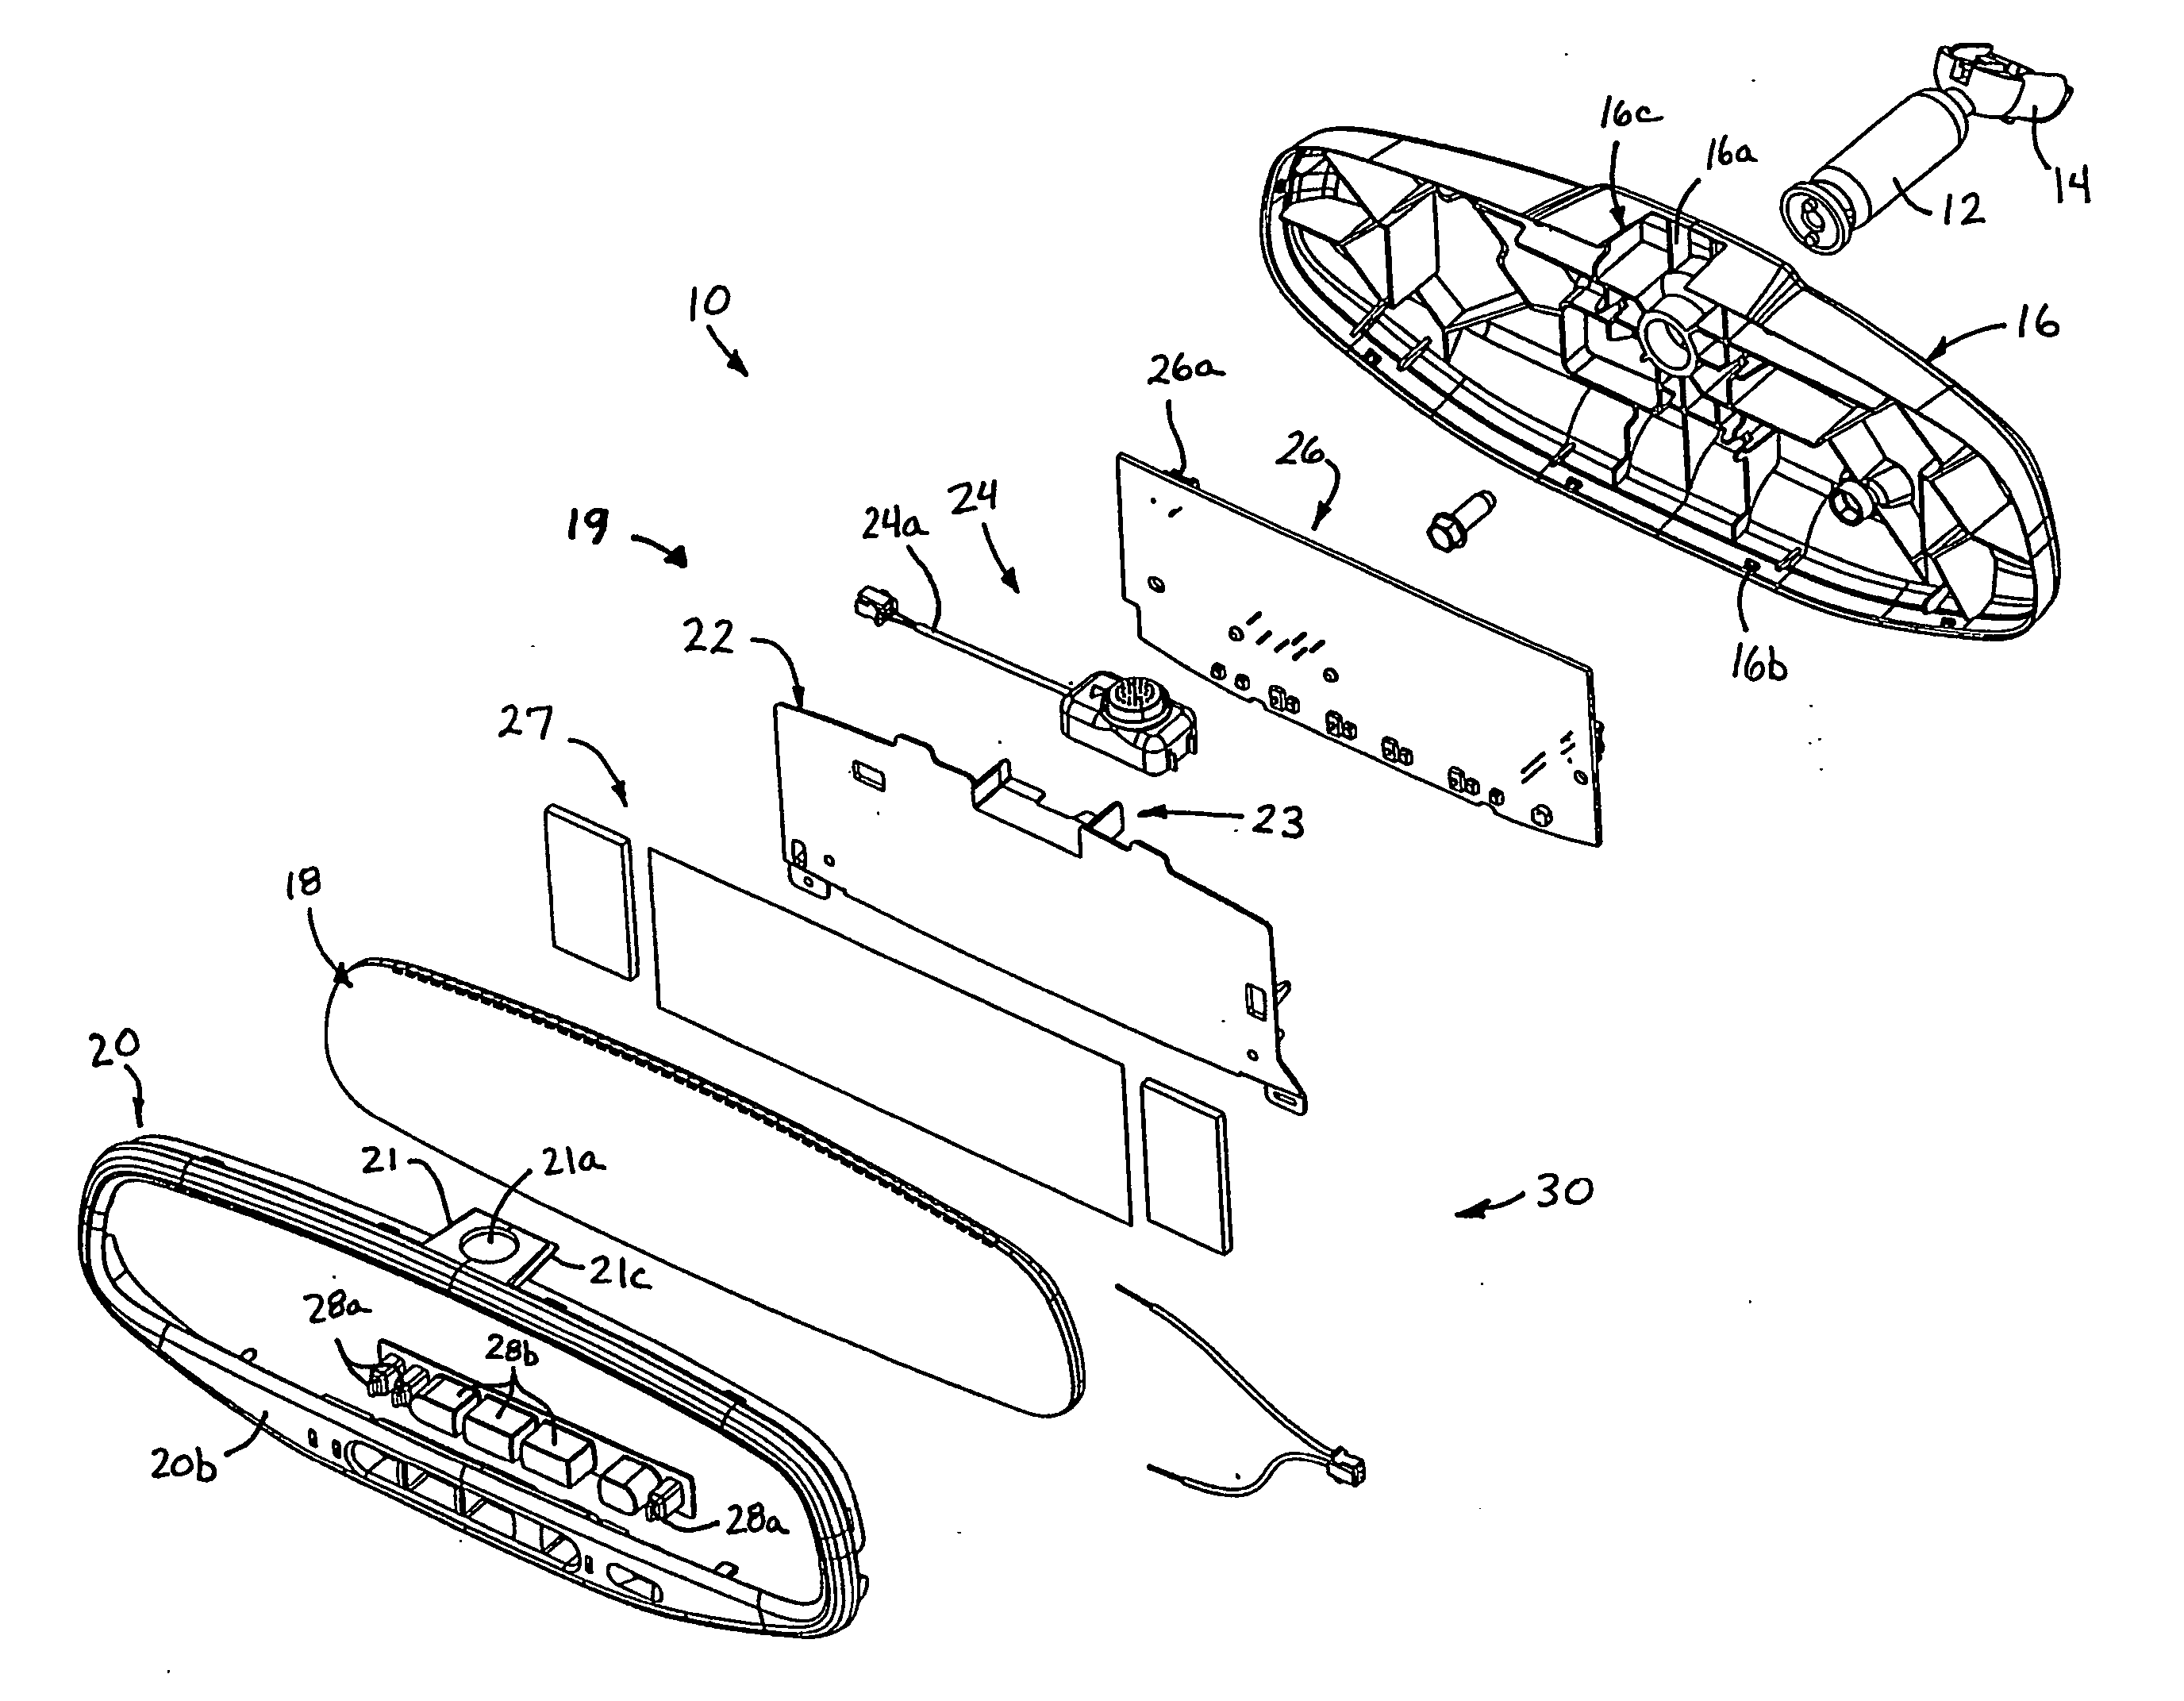 Microphone system for vehicle